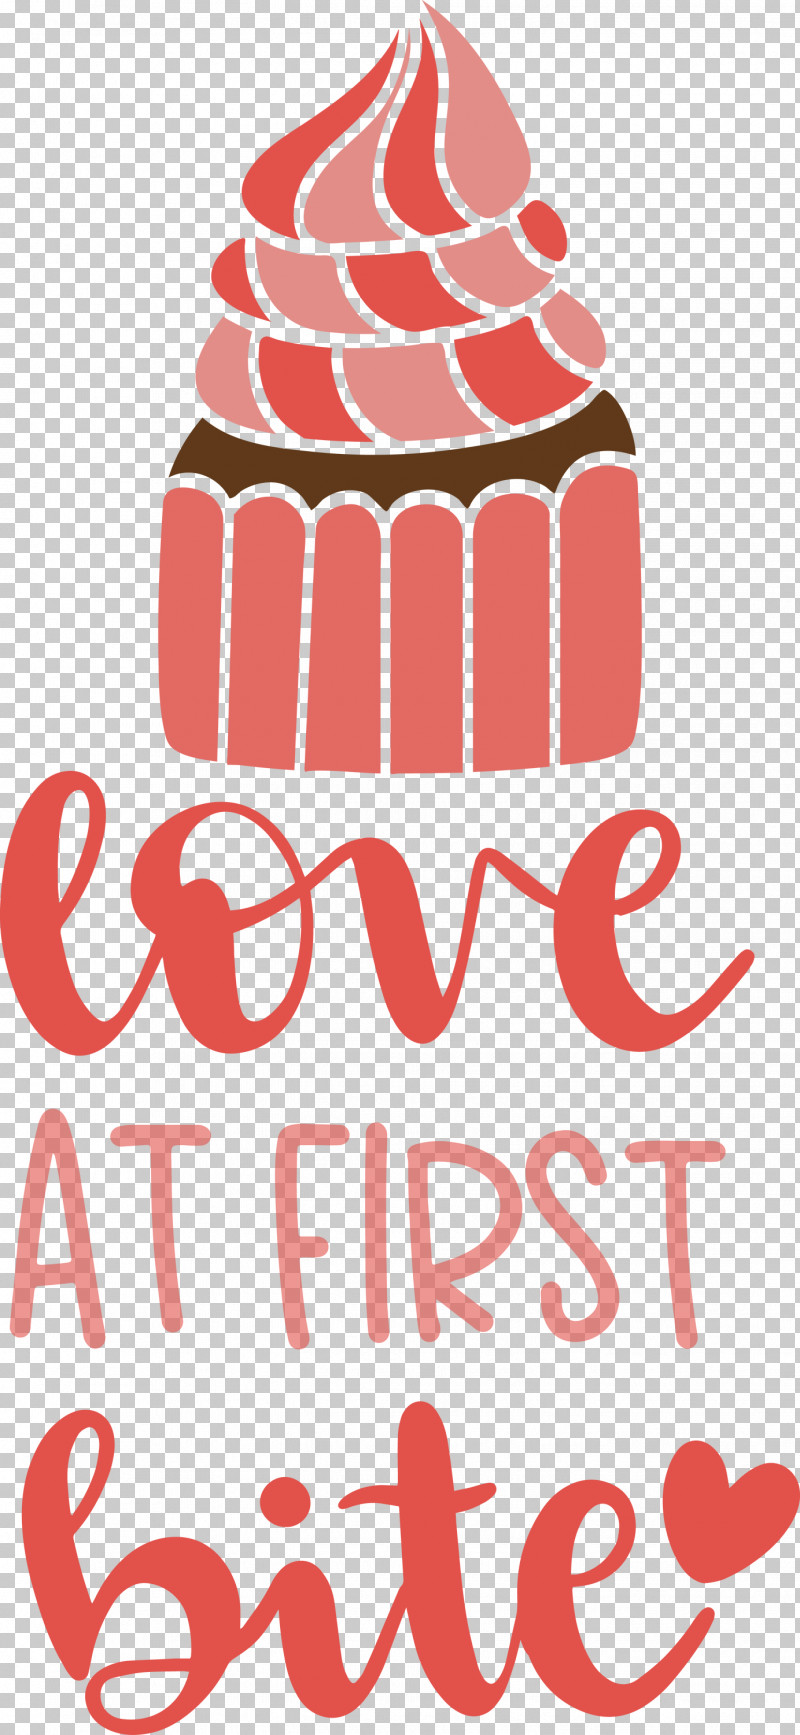 Love At First Bite Cooking Kitchen PNG, Clipart, Cooking, Cupcake, Food, Geometry, Kitchen Free PNG Download